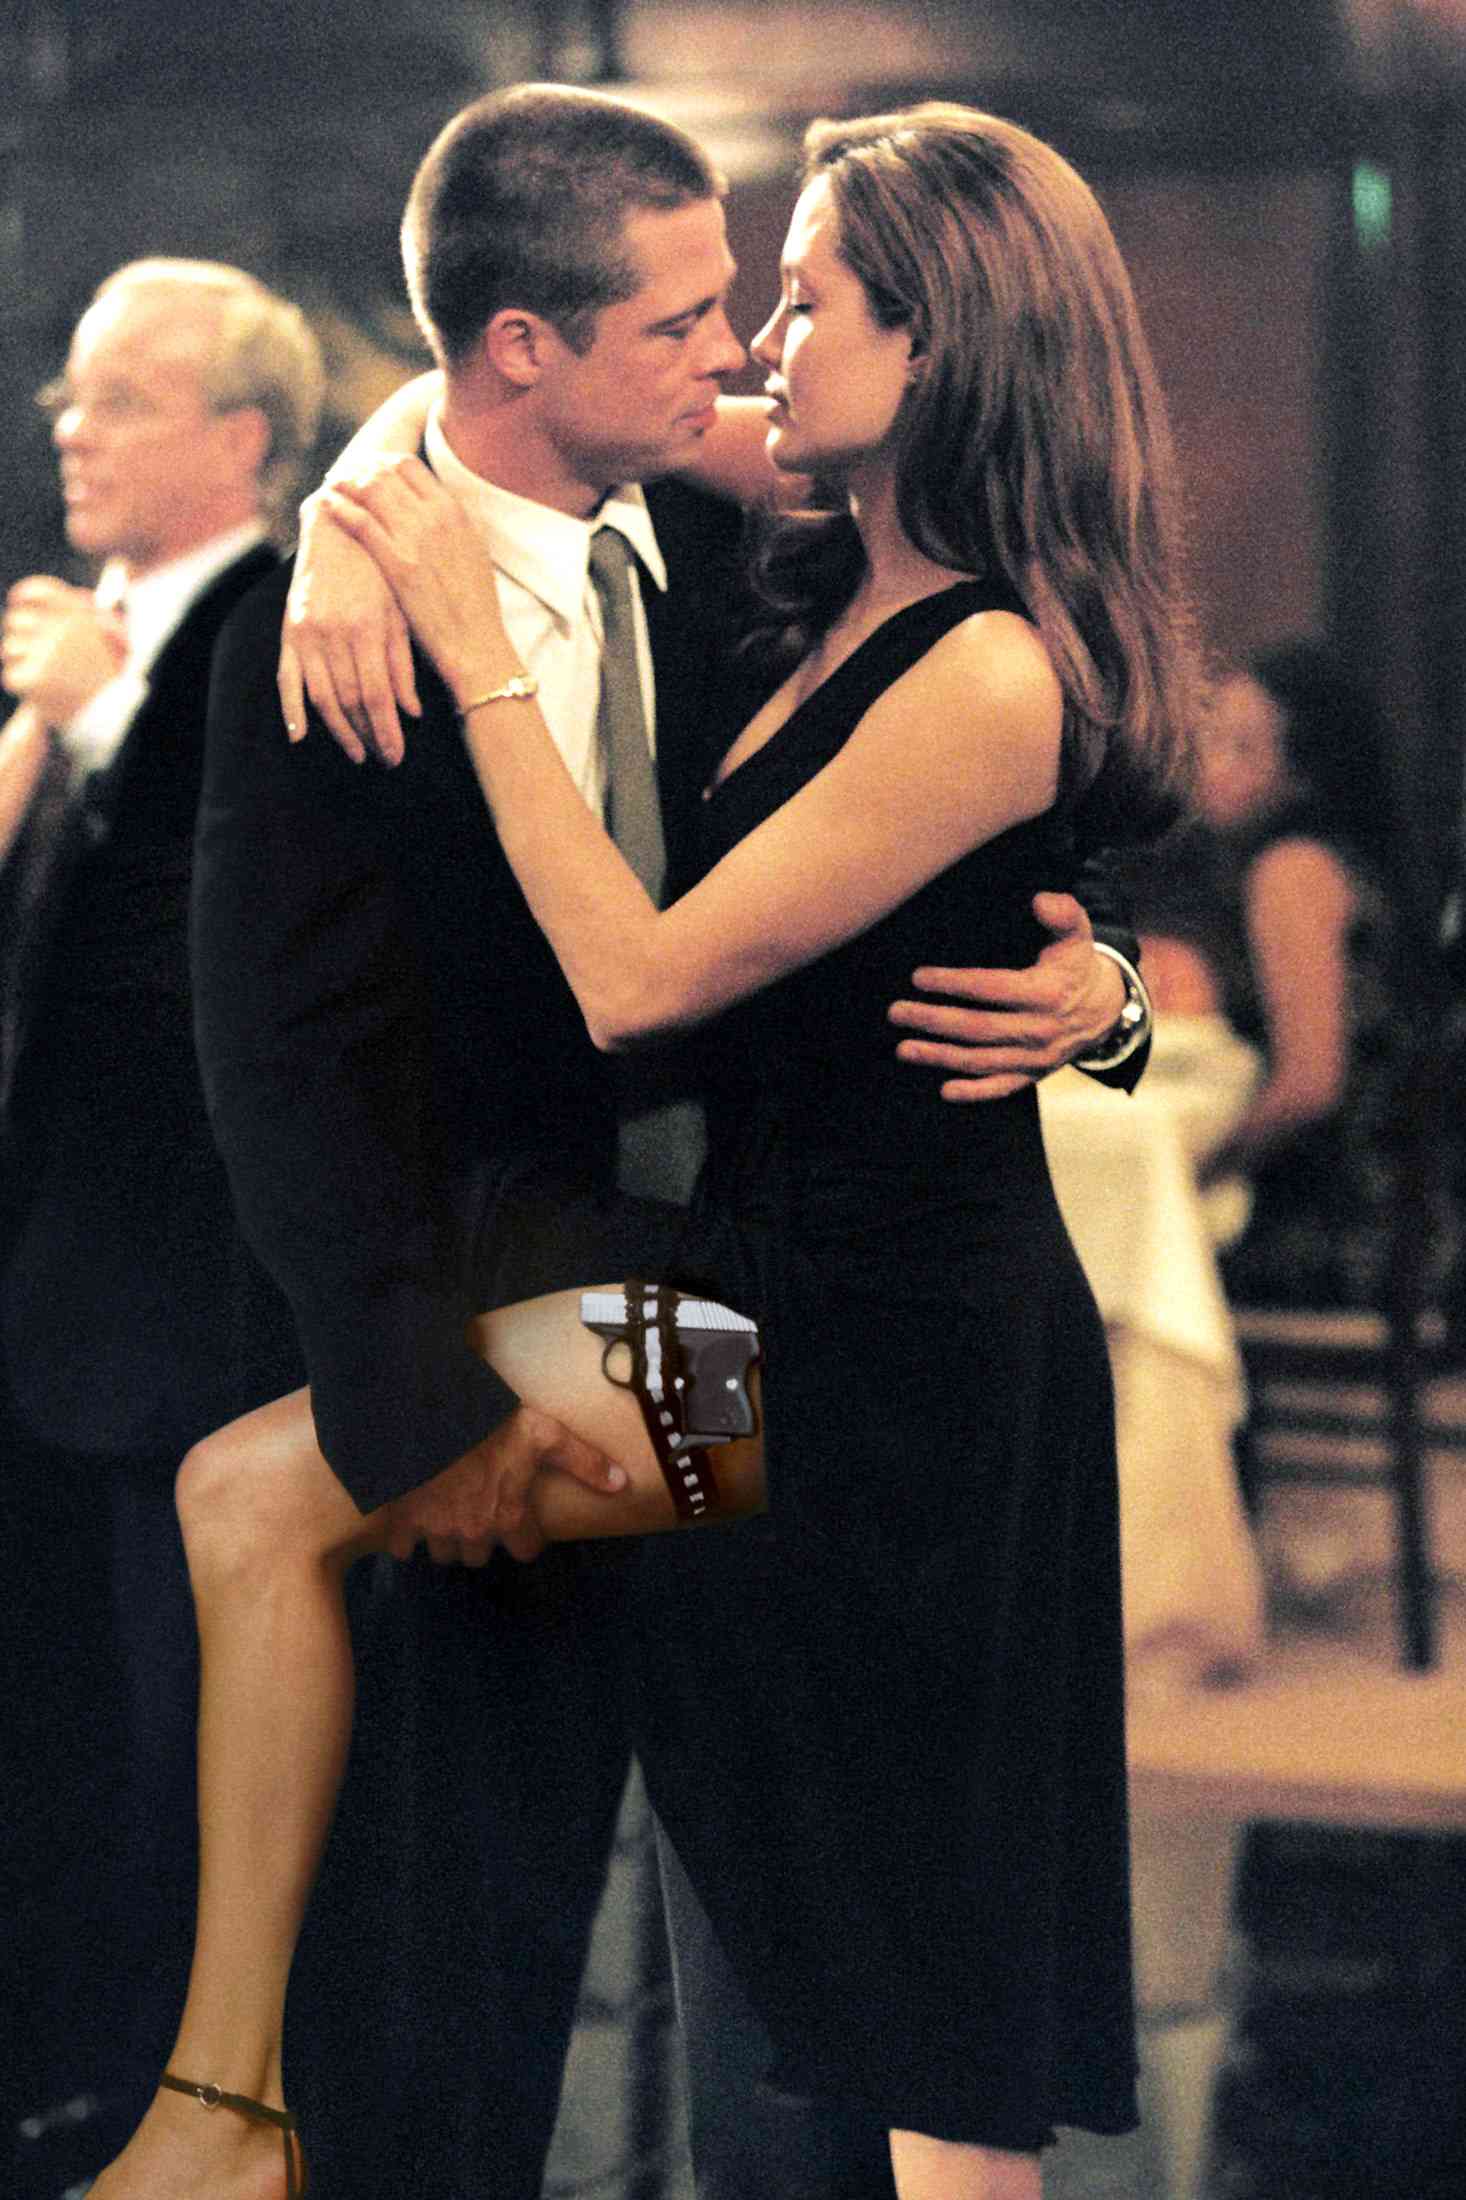 U.S. actors Brad Pitt and Angelina Jolie act as John and Jane Smith in the movie "Mr. and Mrs. Smith" in this photo released on June 06, 2005. The movie, which portrays a married couple who happen to be highly paid efficient assassins and work for competing organizations, opens in the United States on June 10, 2005. NO ARCHIVES NO THIRD PARTY SALES  REUTERS/Stephen Vaughn/20th Century Fox/Handout***DO NOT DELETE***DO NOT PURGE